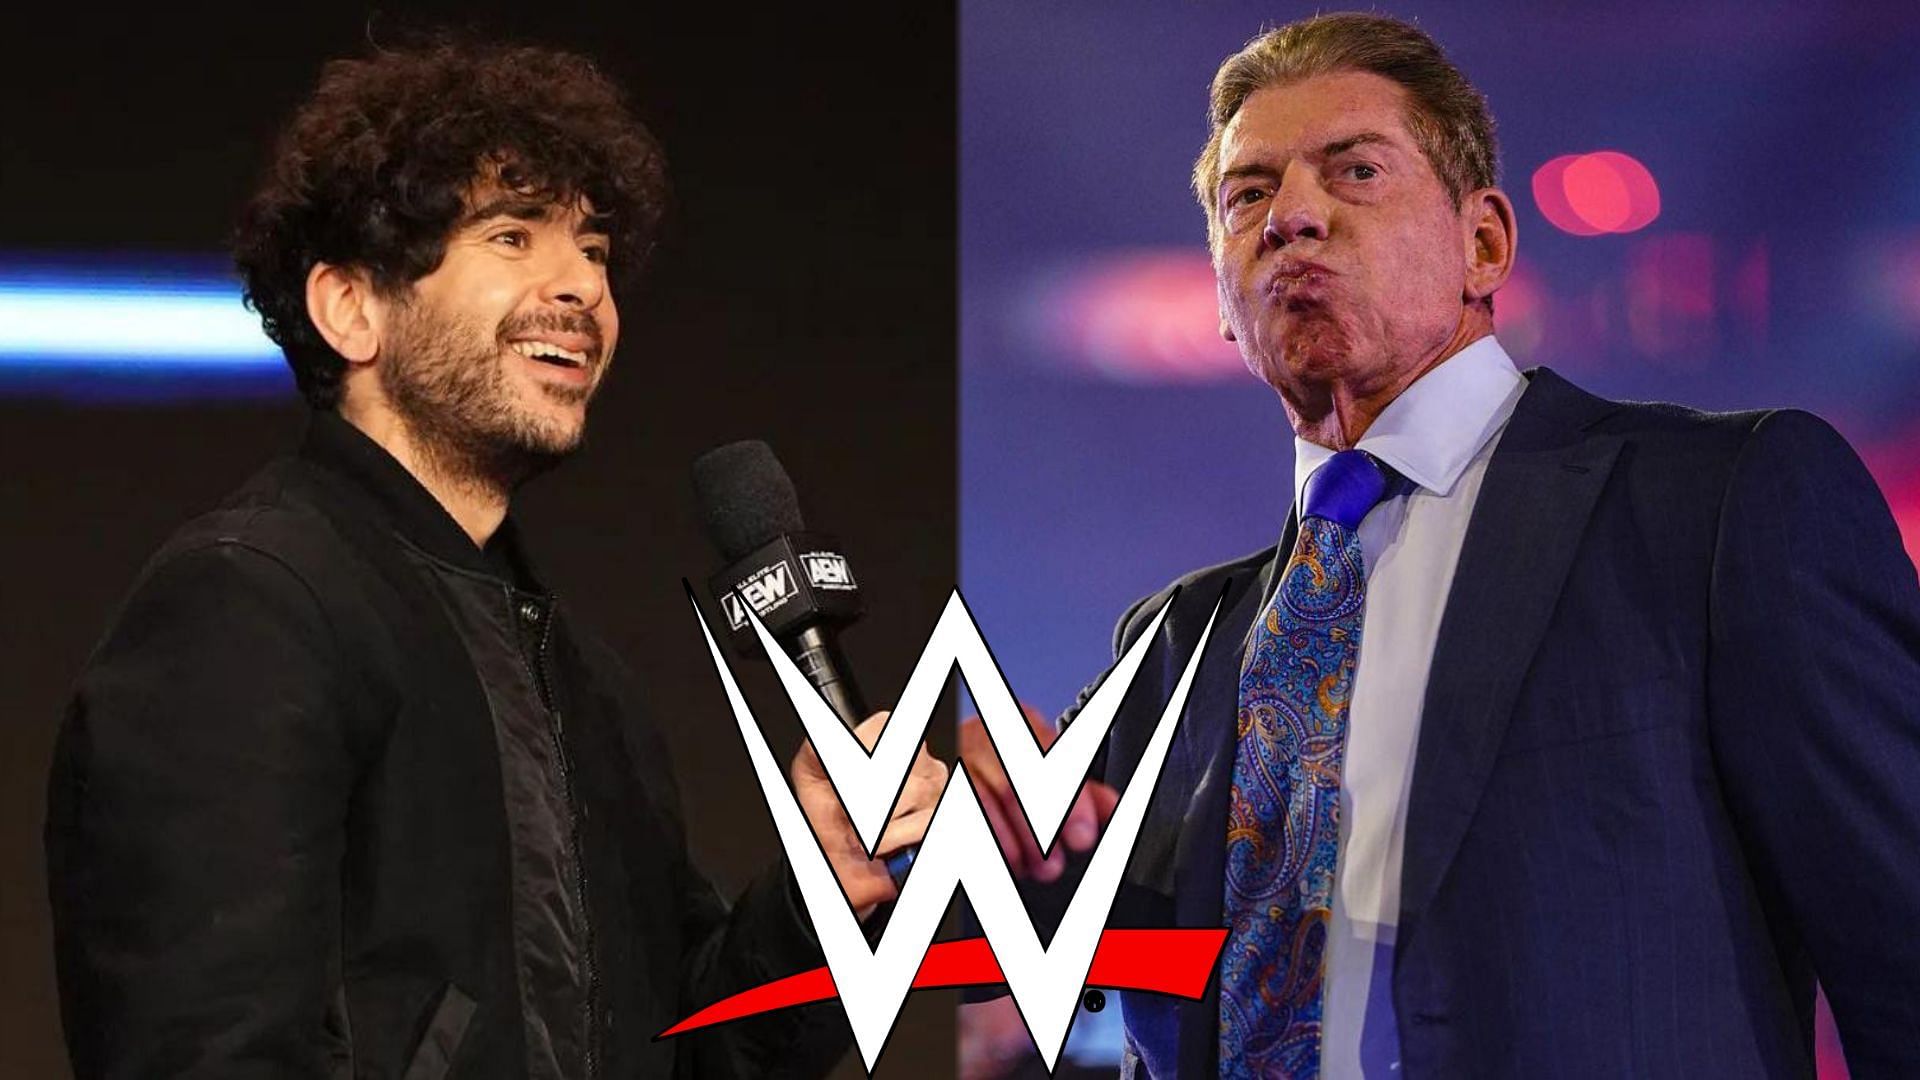 Does Vince McMahon have enough power in WWE to block this potential move by Tony Khan?